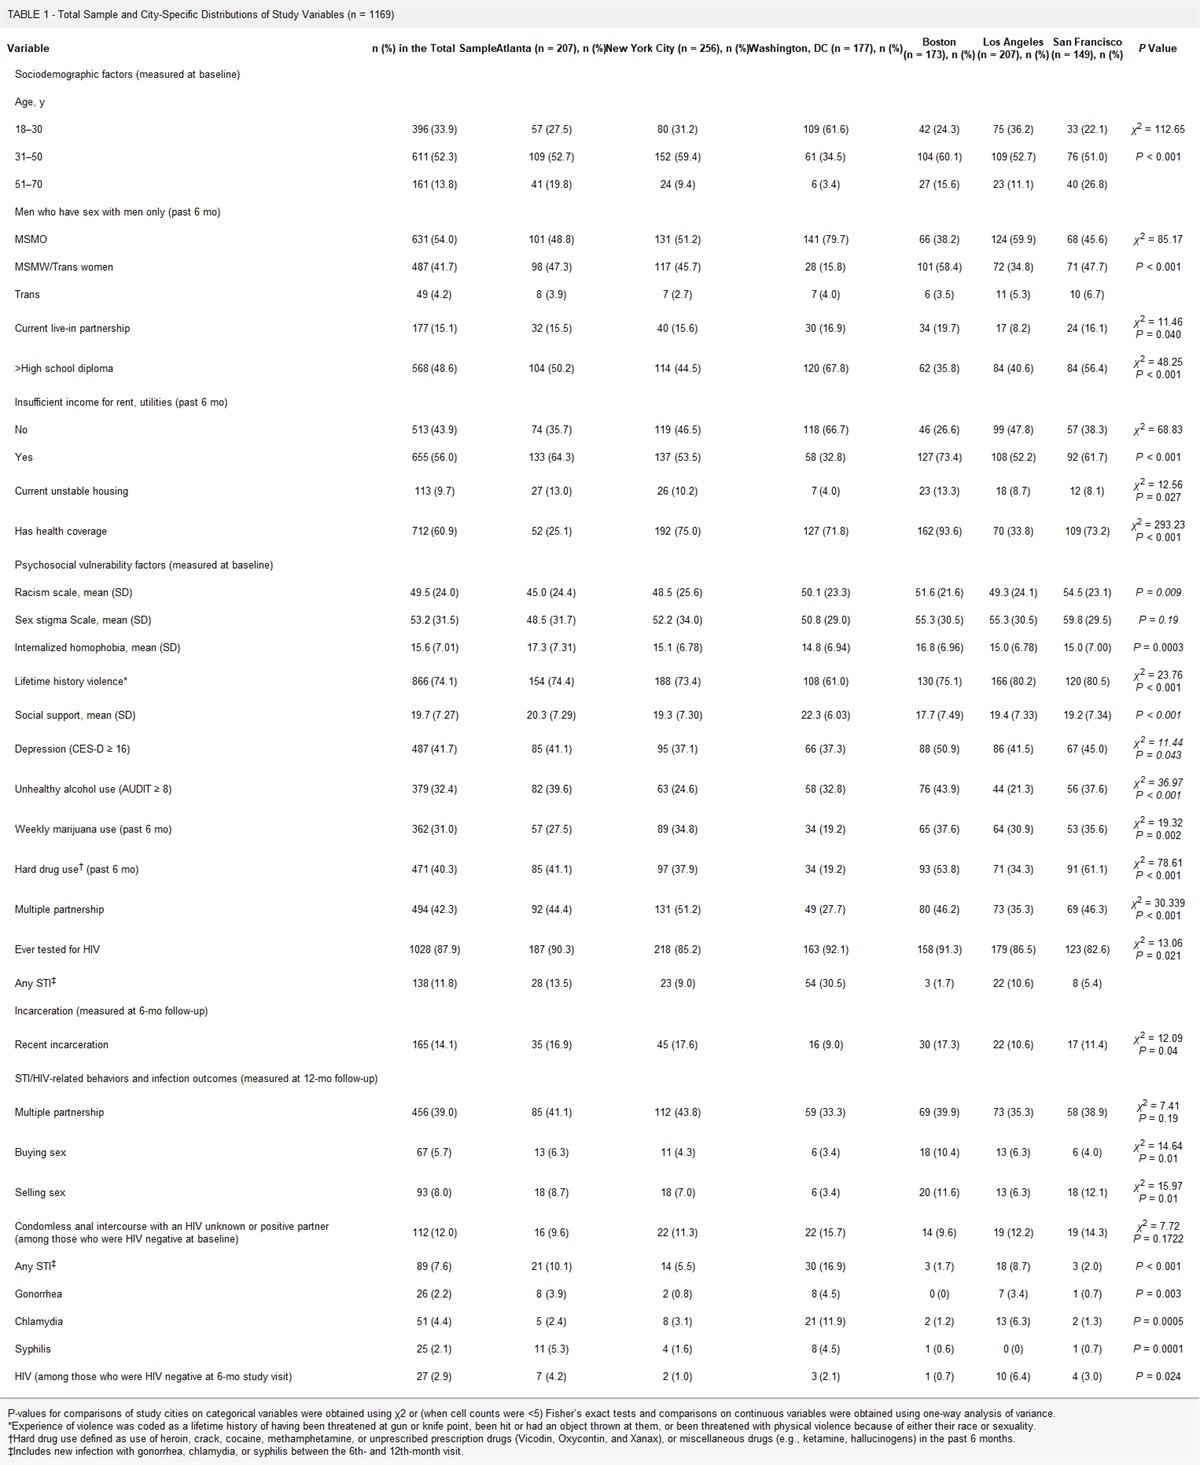 Incarceration and Sexual Risk Behavior and Incident Sexually Transmitted Infection/HIV in HIV Prevention Trials Network 061: Differences by Study City and Among Black Sexual Minority Men Who Have Sex With Men, Black Sexual Minority Men Who Have Sex With Men and Women, and Black Transgender Women